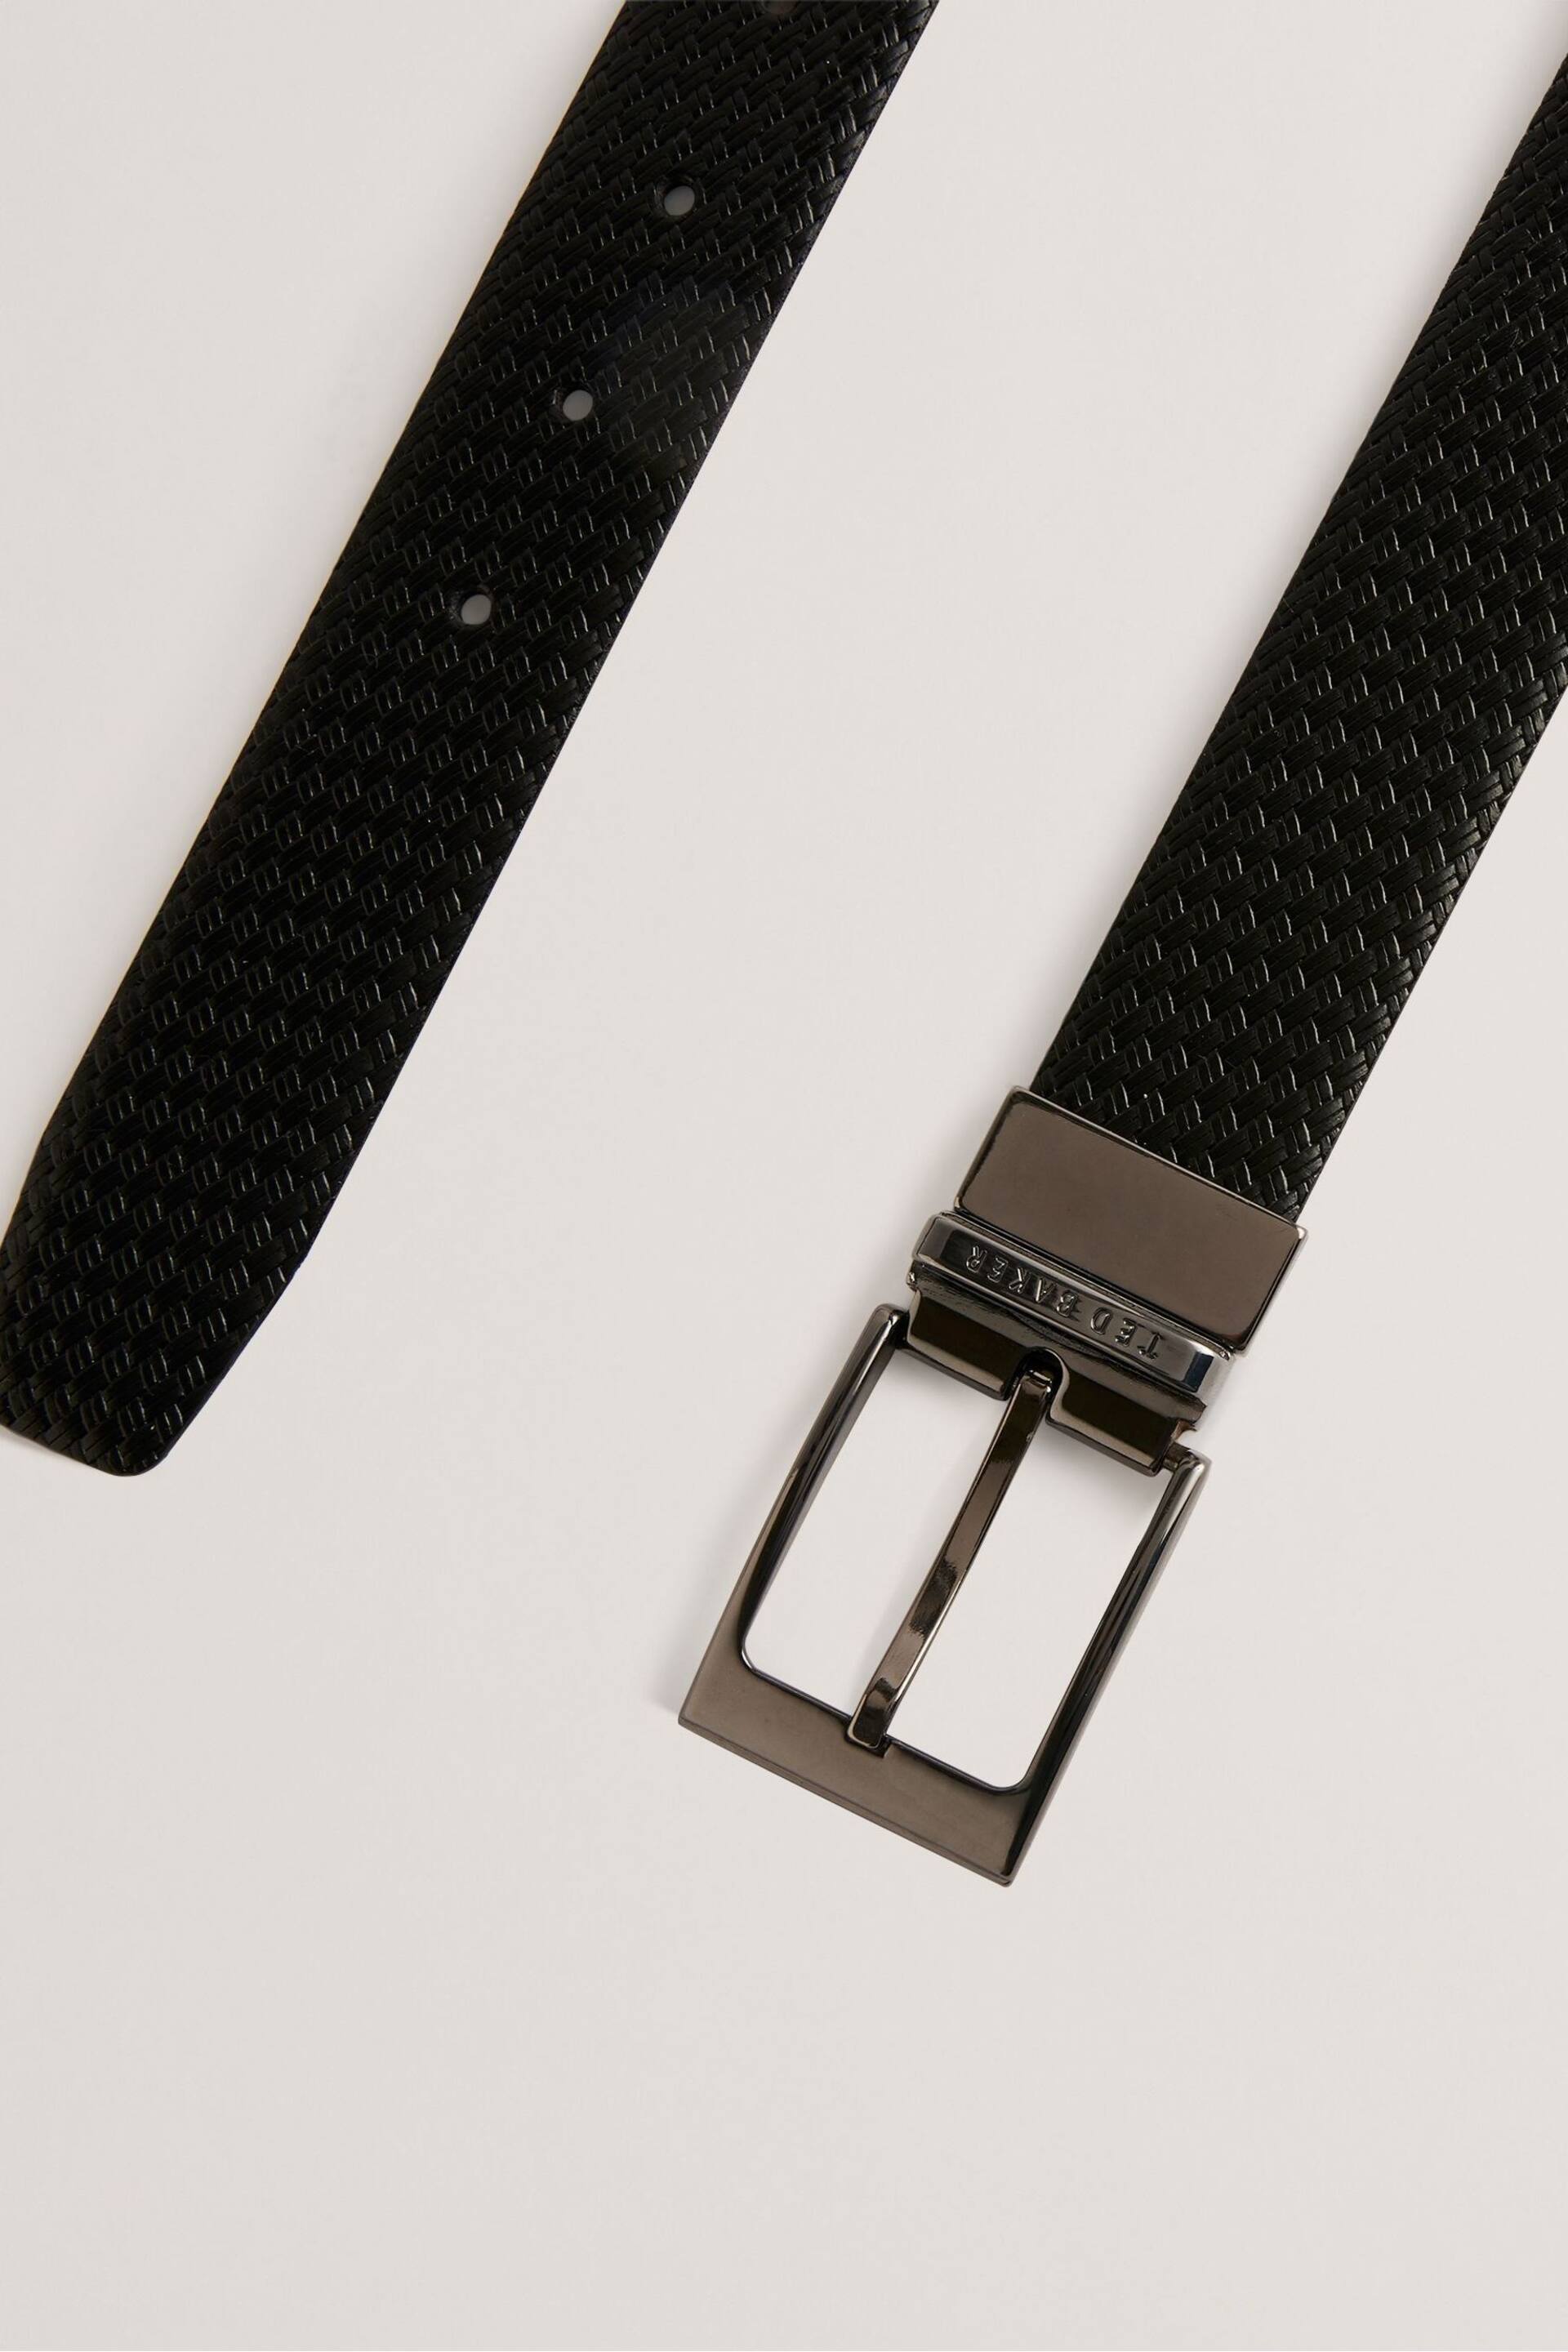 Ted Baker Black Waide Woven Texture Leather Belt - Image 3 of 4